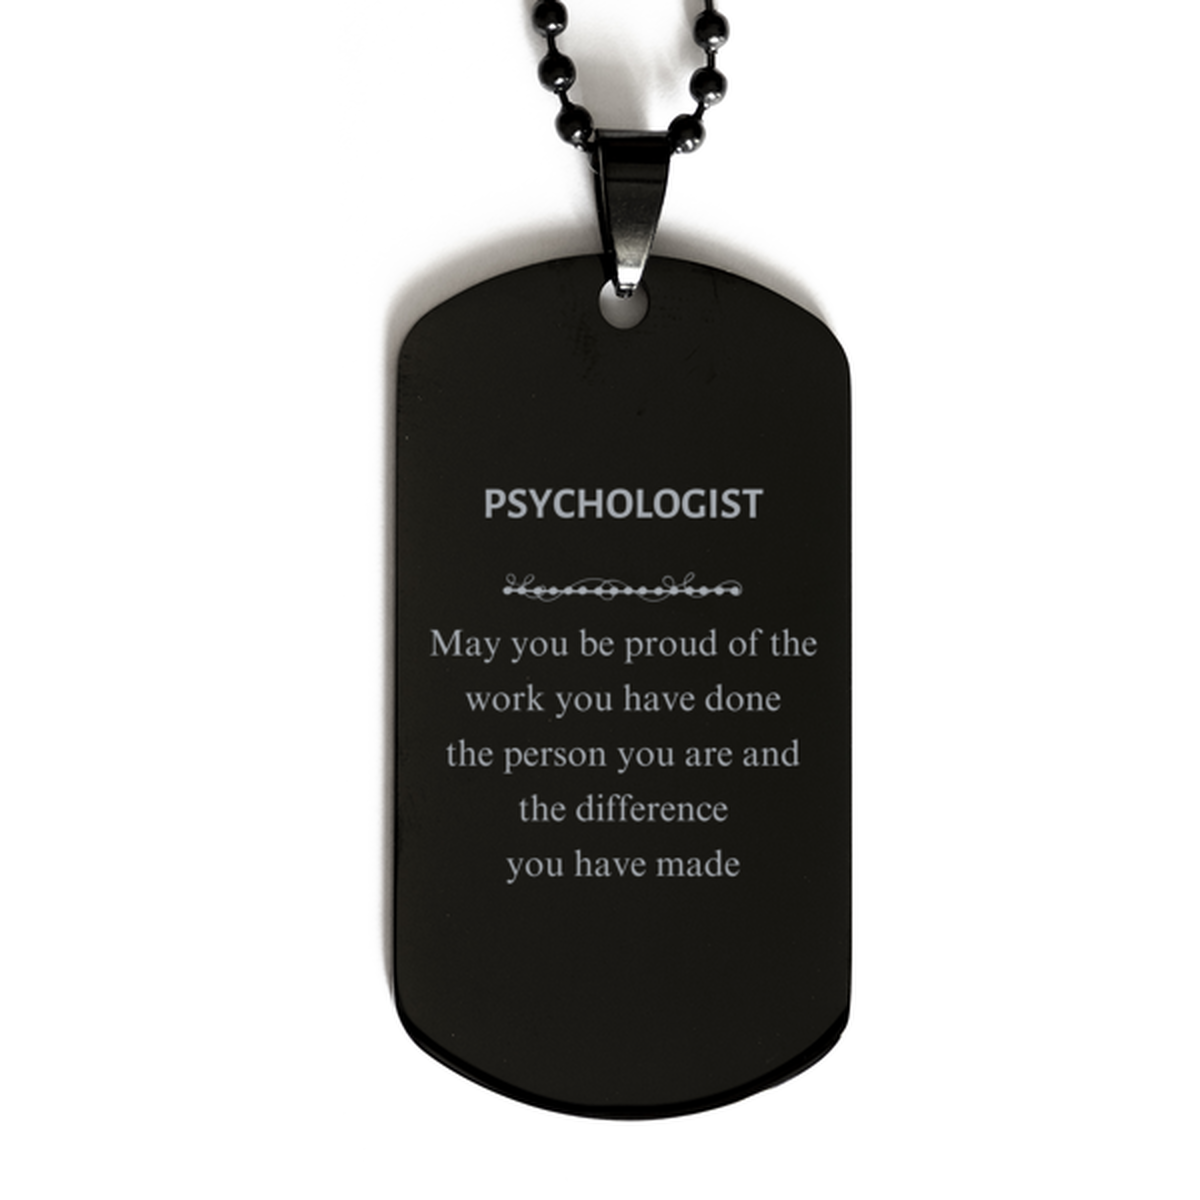 Psychologist May you be proud of the work you have done, Retirement Psychologist Black Dog Tag for Colleague Appreciation Gifts Amazing for Psychologist